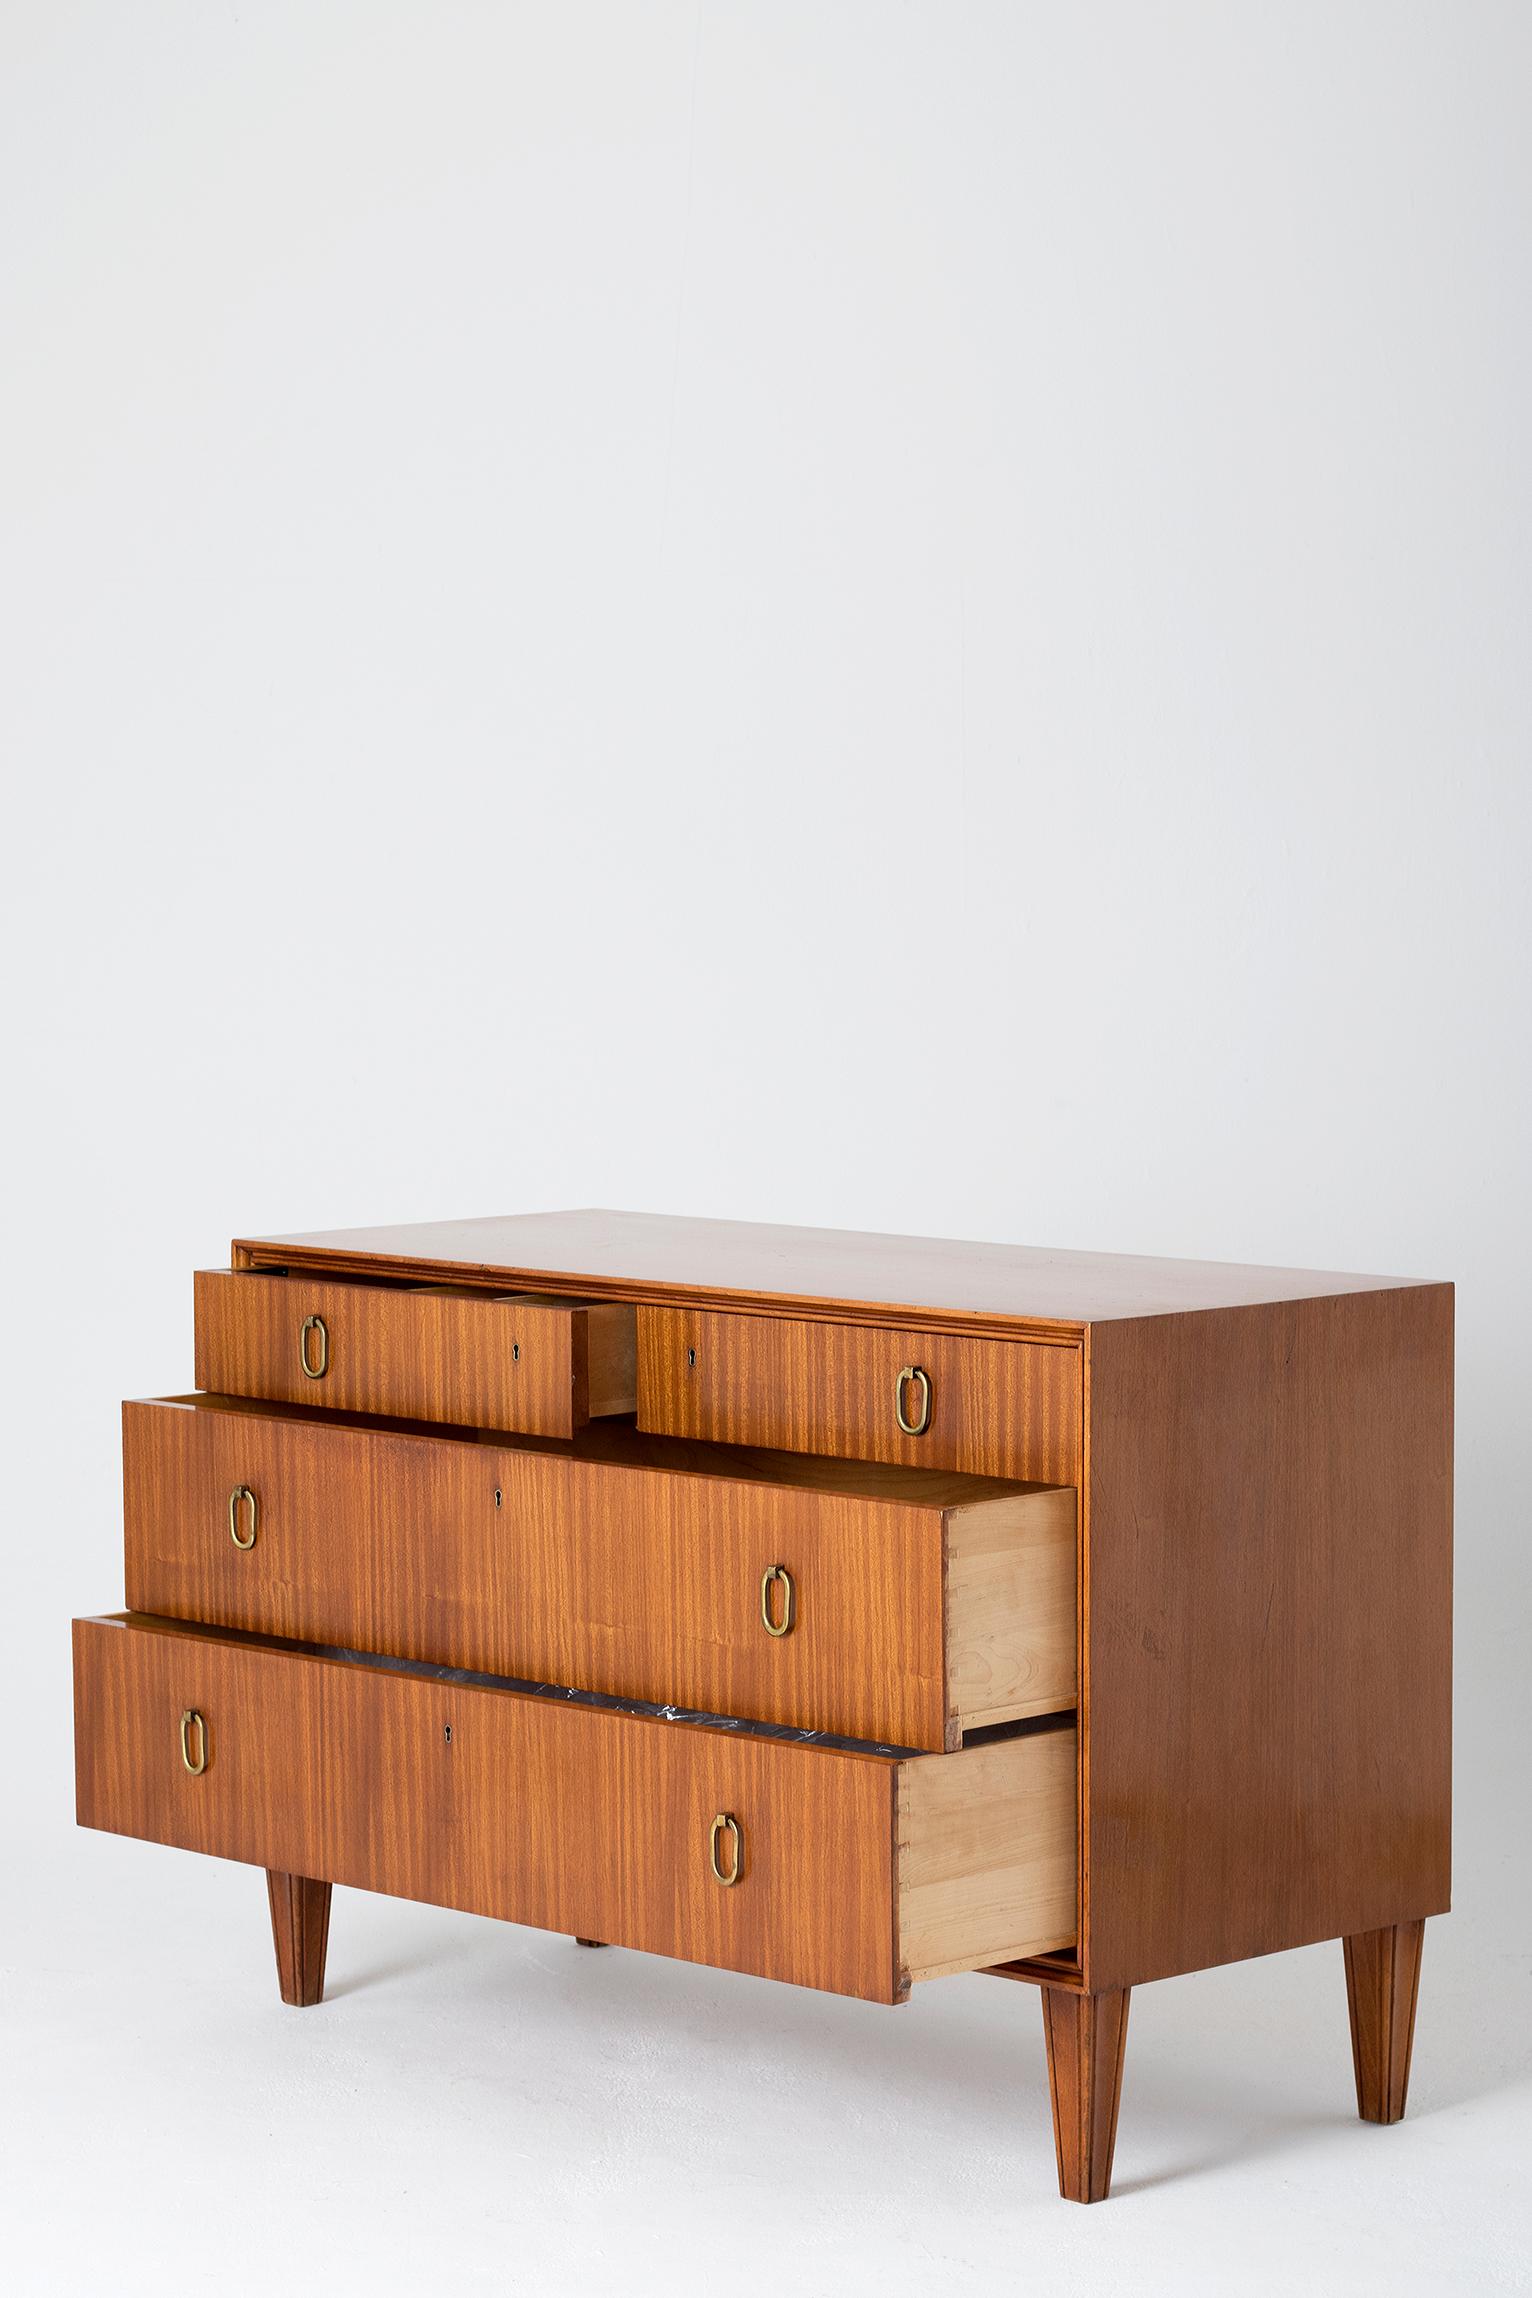 Brass Midcentury Mahogany Chest of Drawers by Axel Larsson for Bodafors